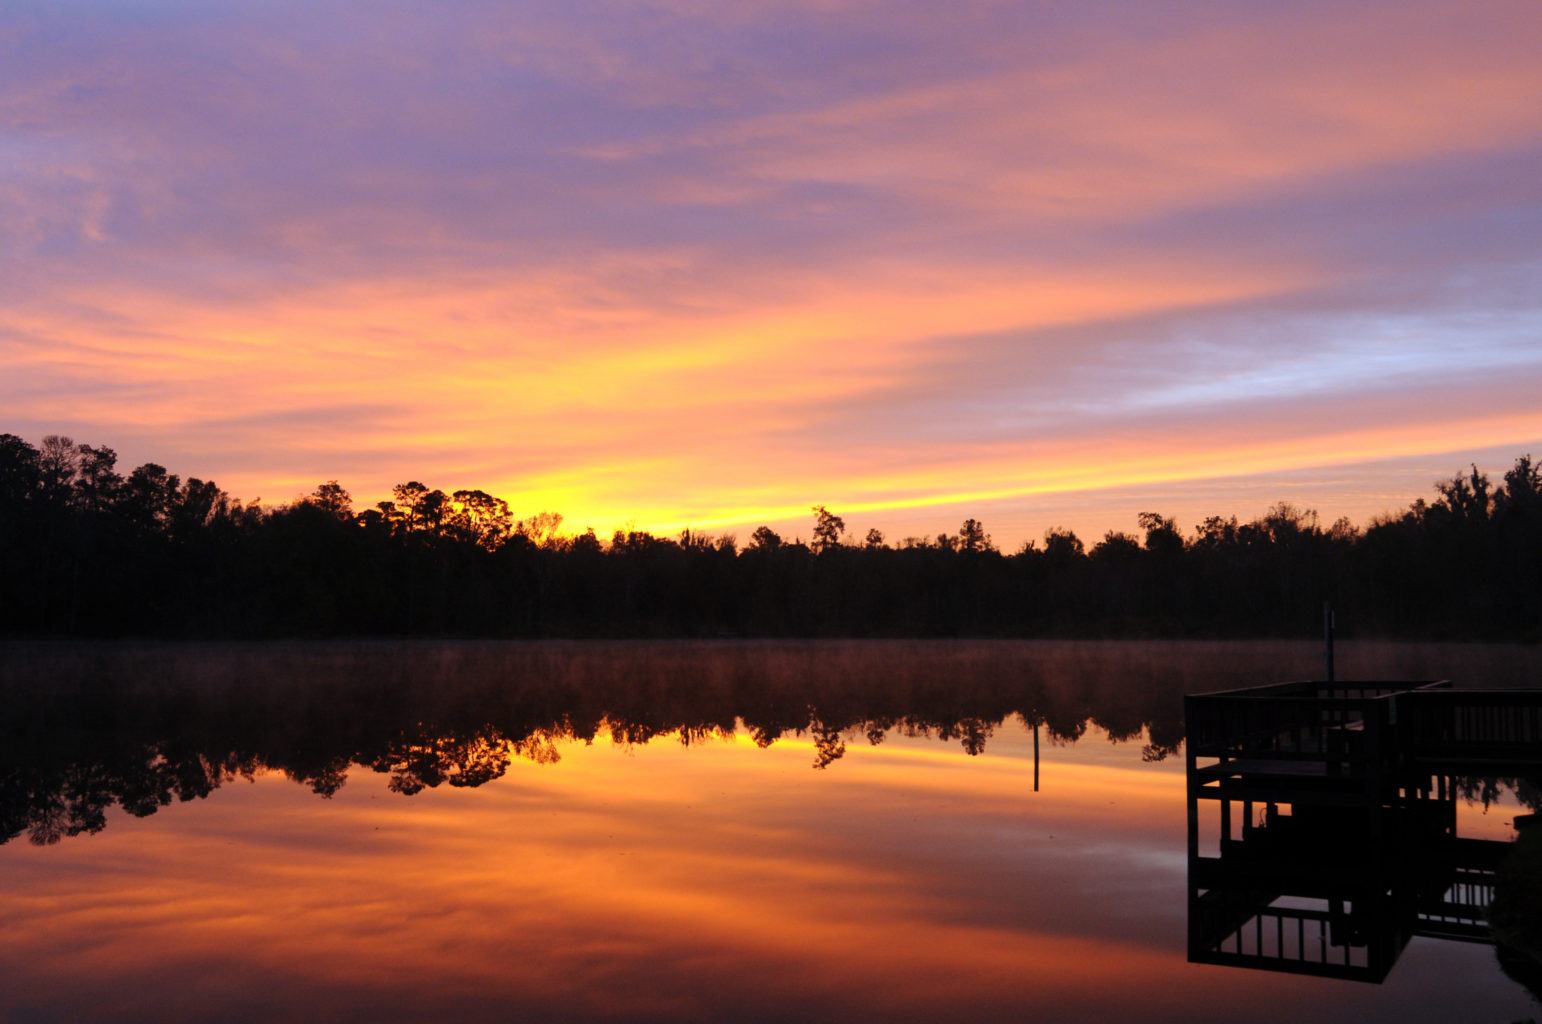 Wake up early to catch the beautiful sunrise at Campers Holiday.